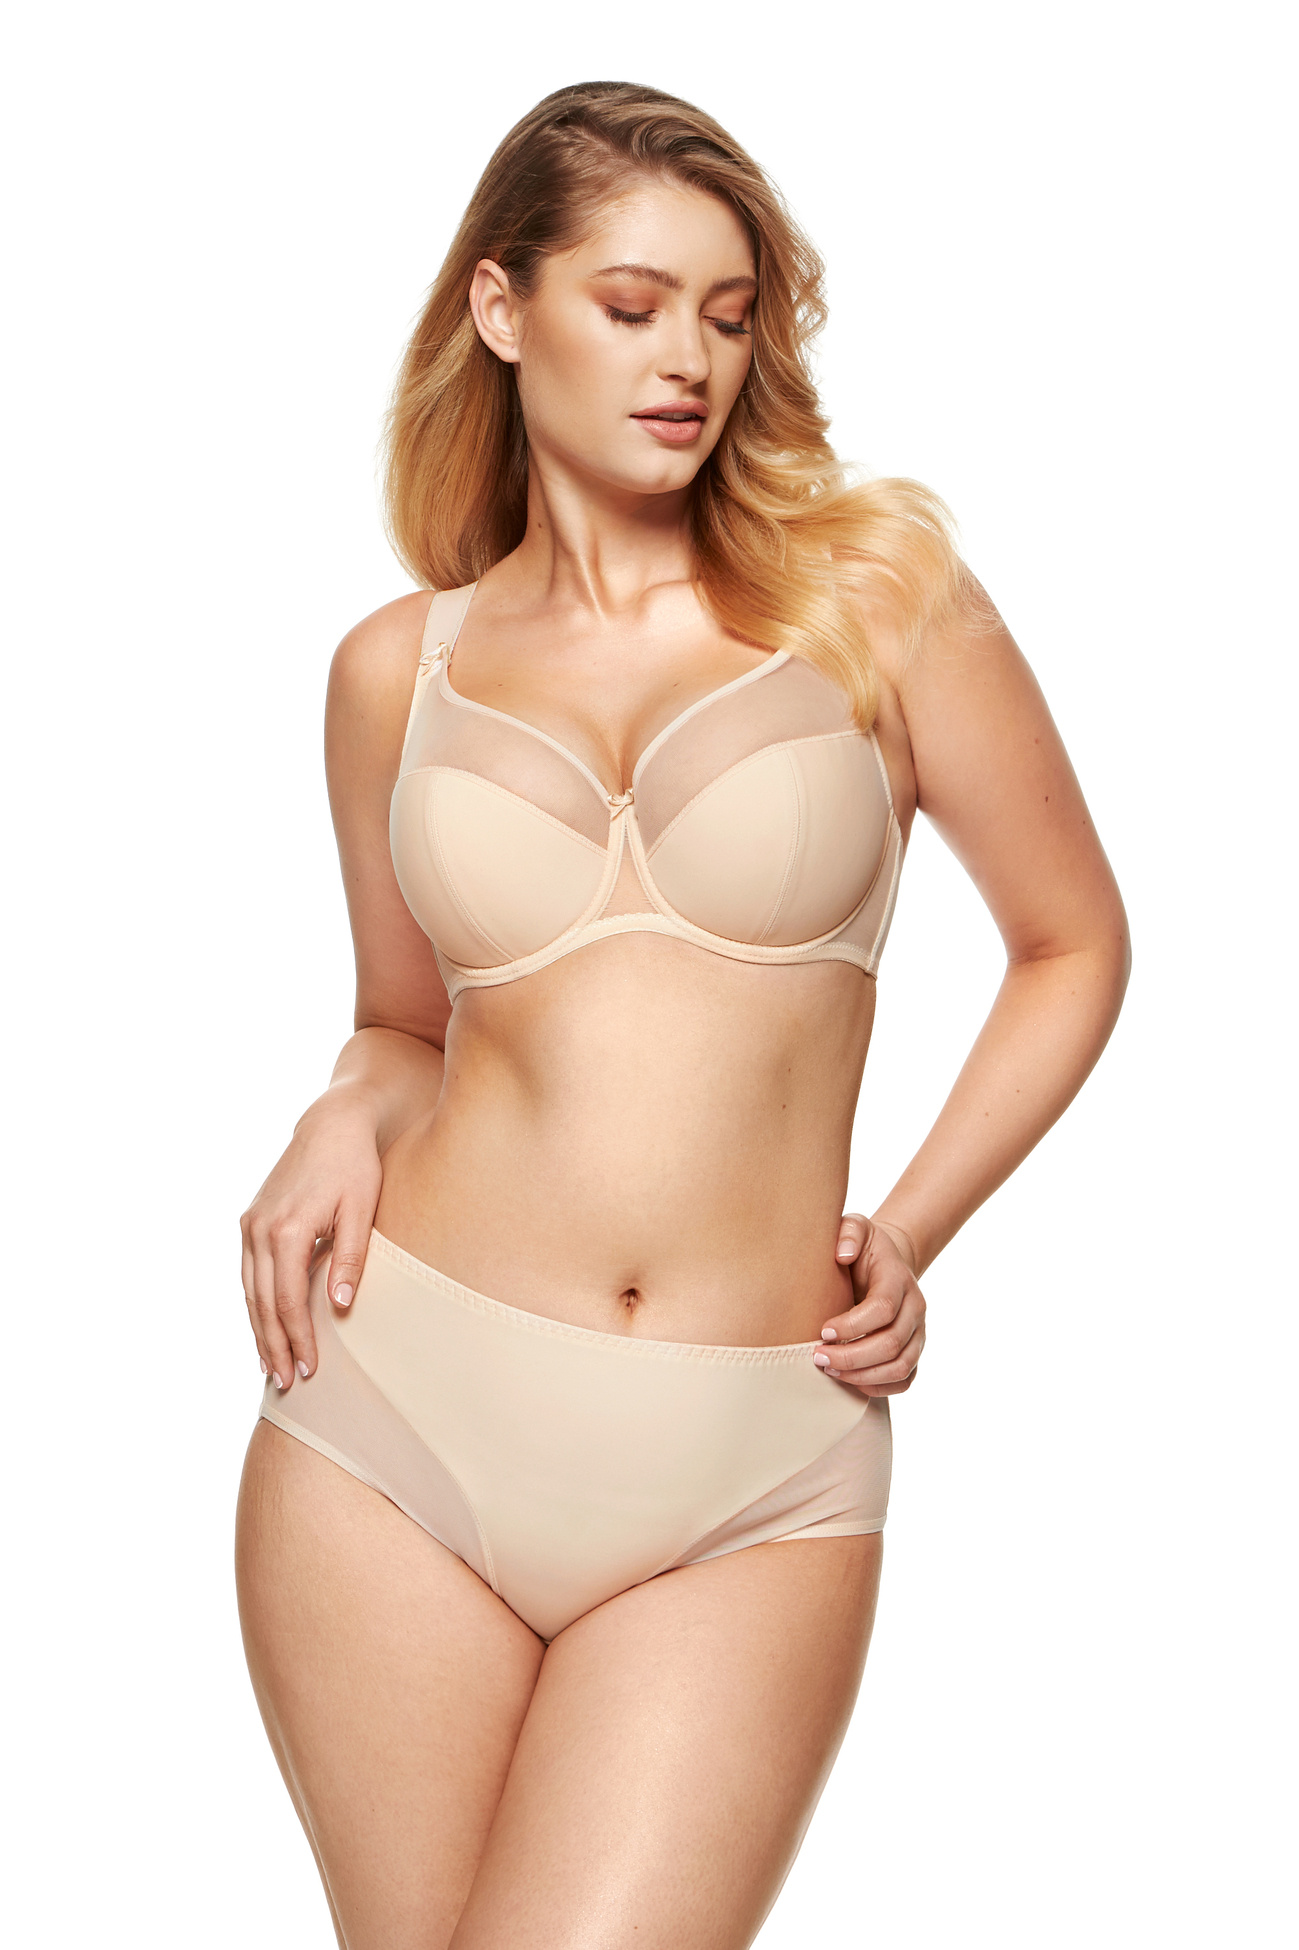 ZARA BNWT Lingerie Collection Bra with Lace Detail Size M Tan